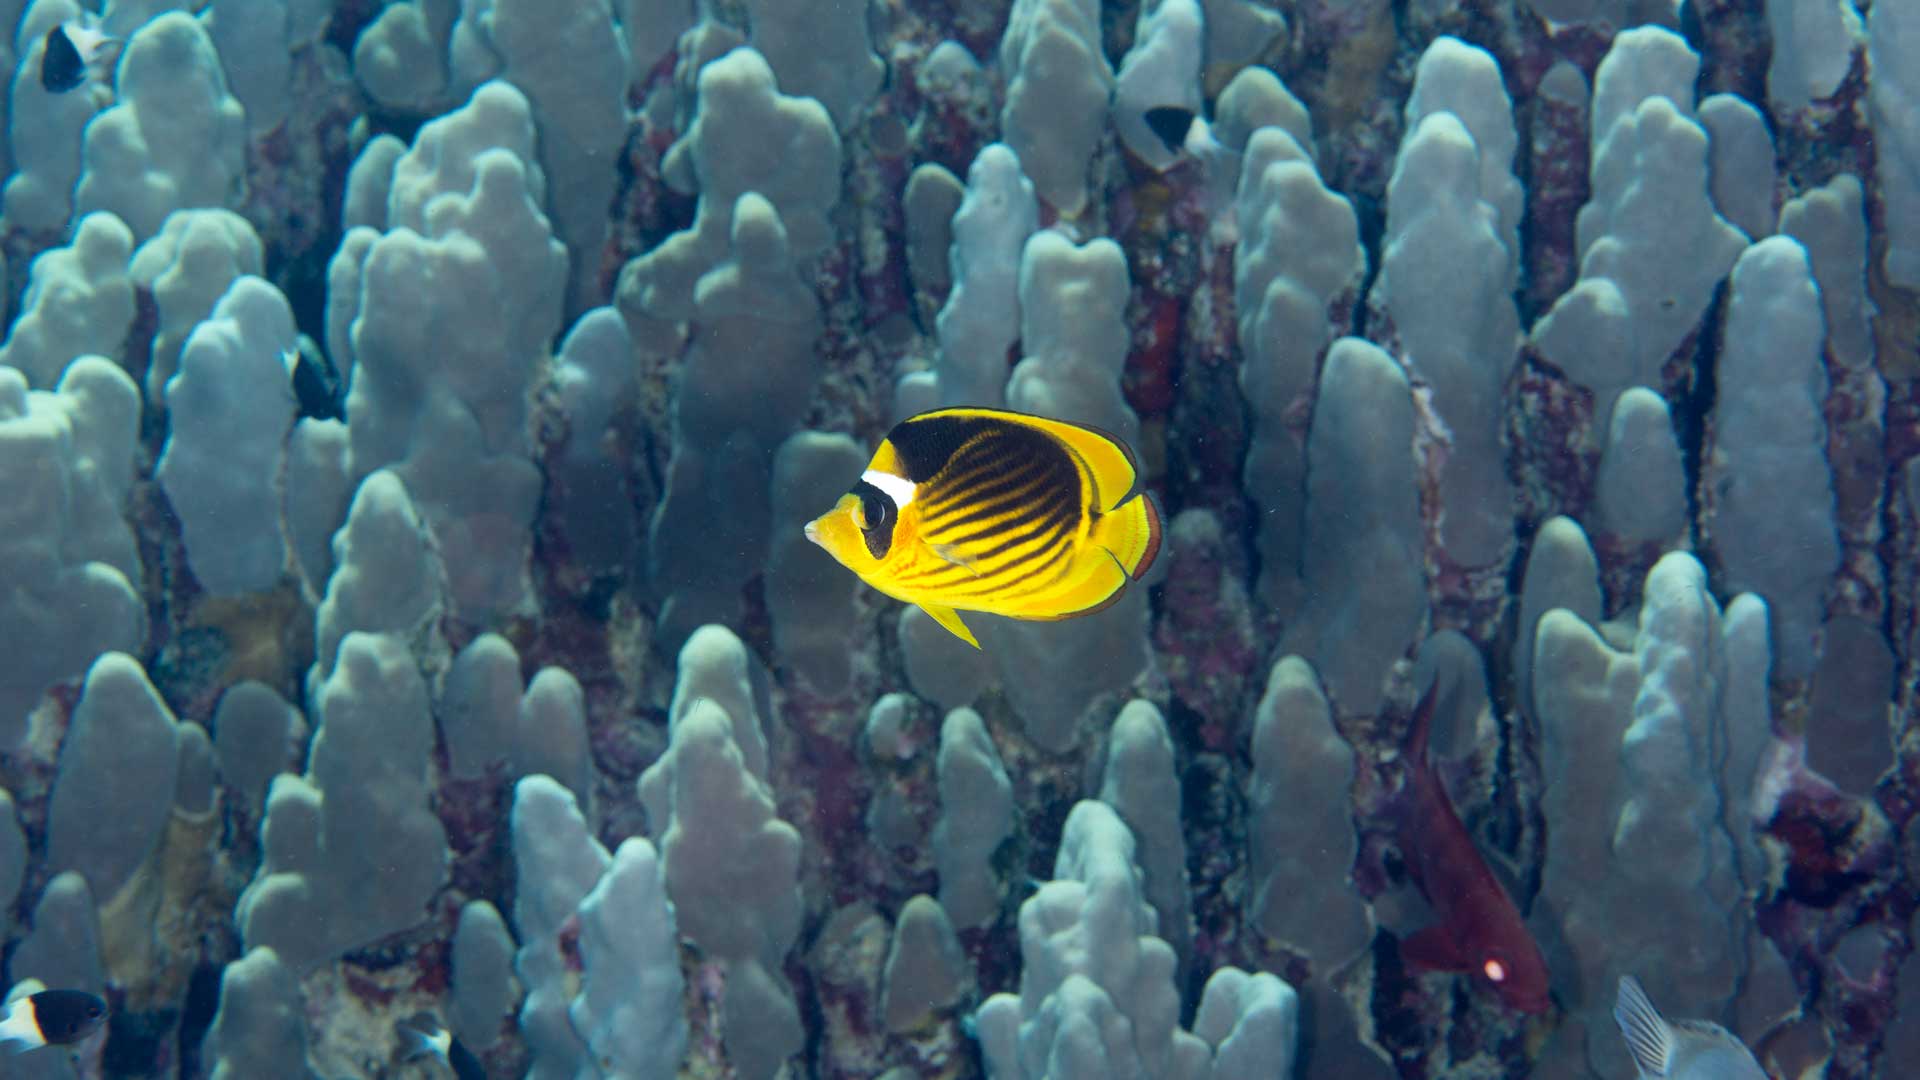 Red sea racoon butterflyfish